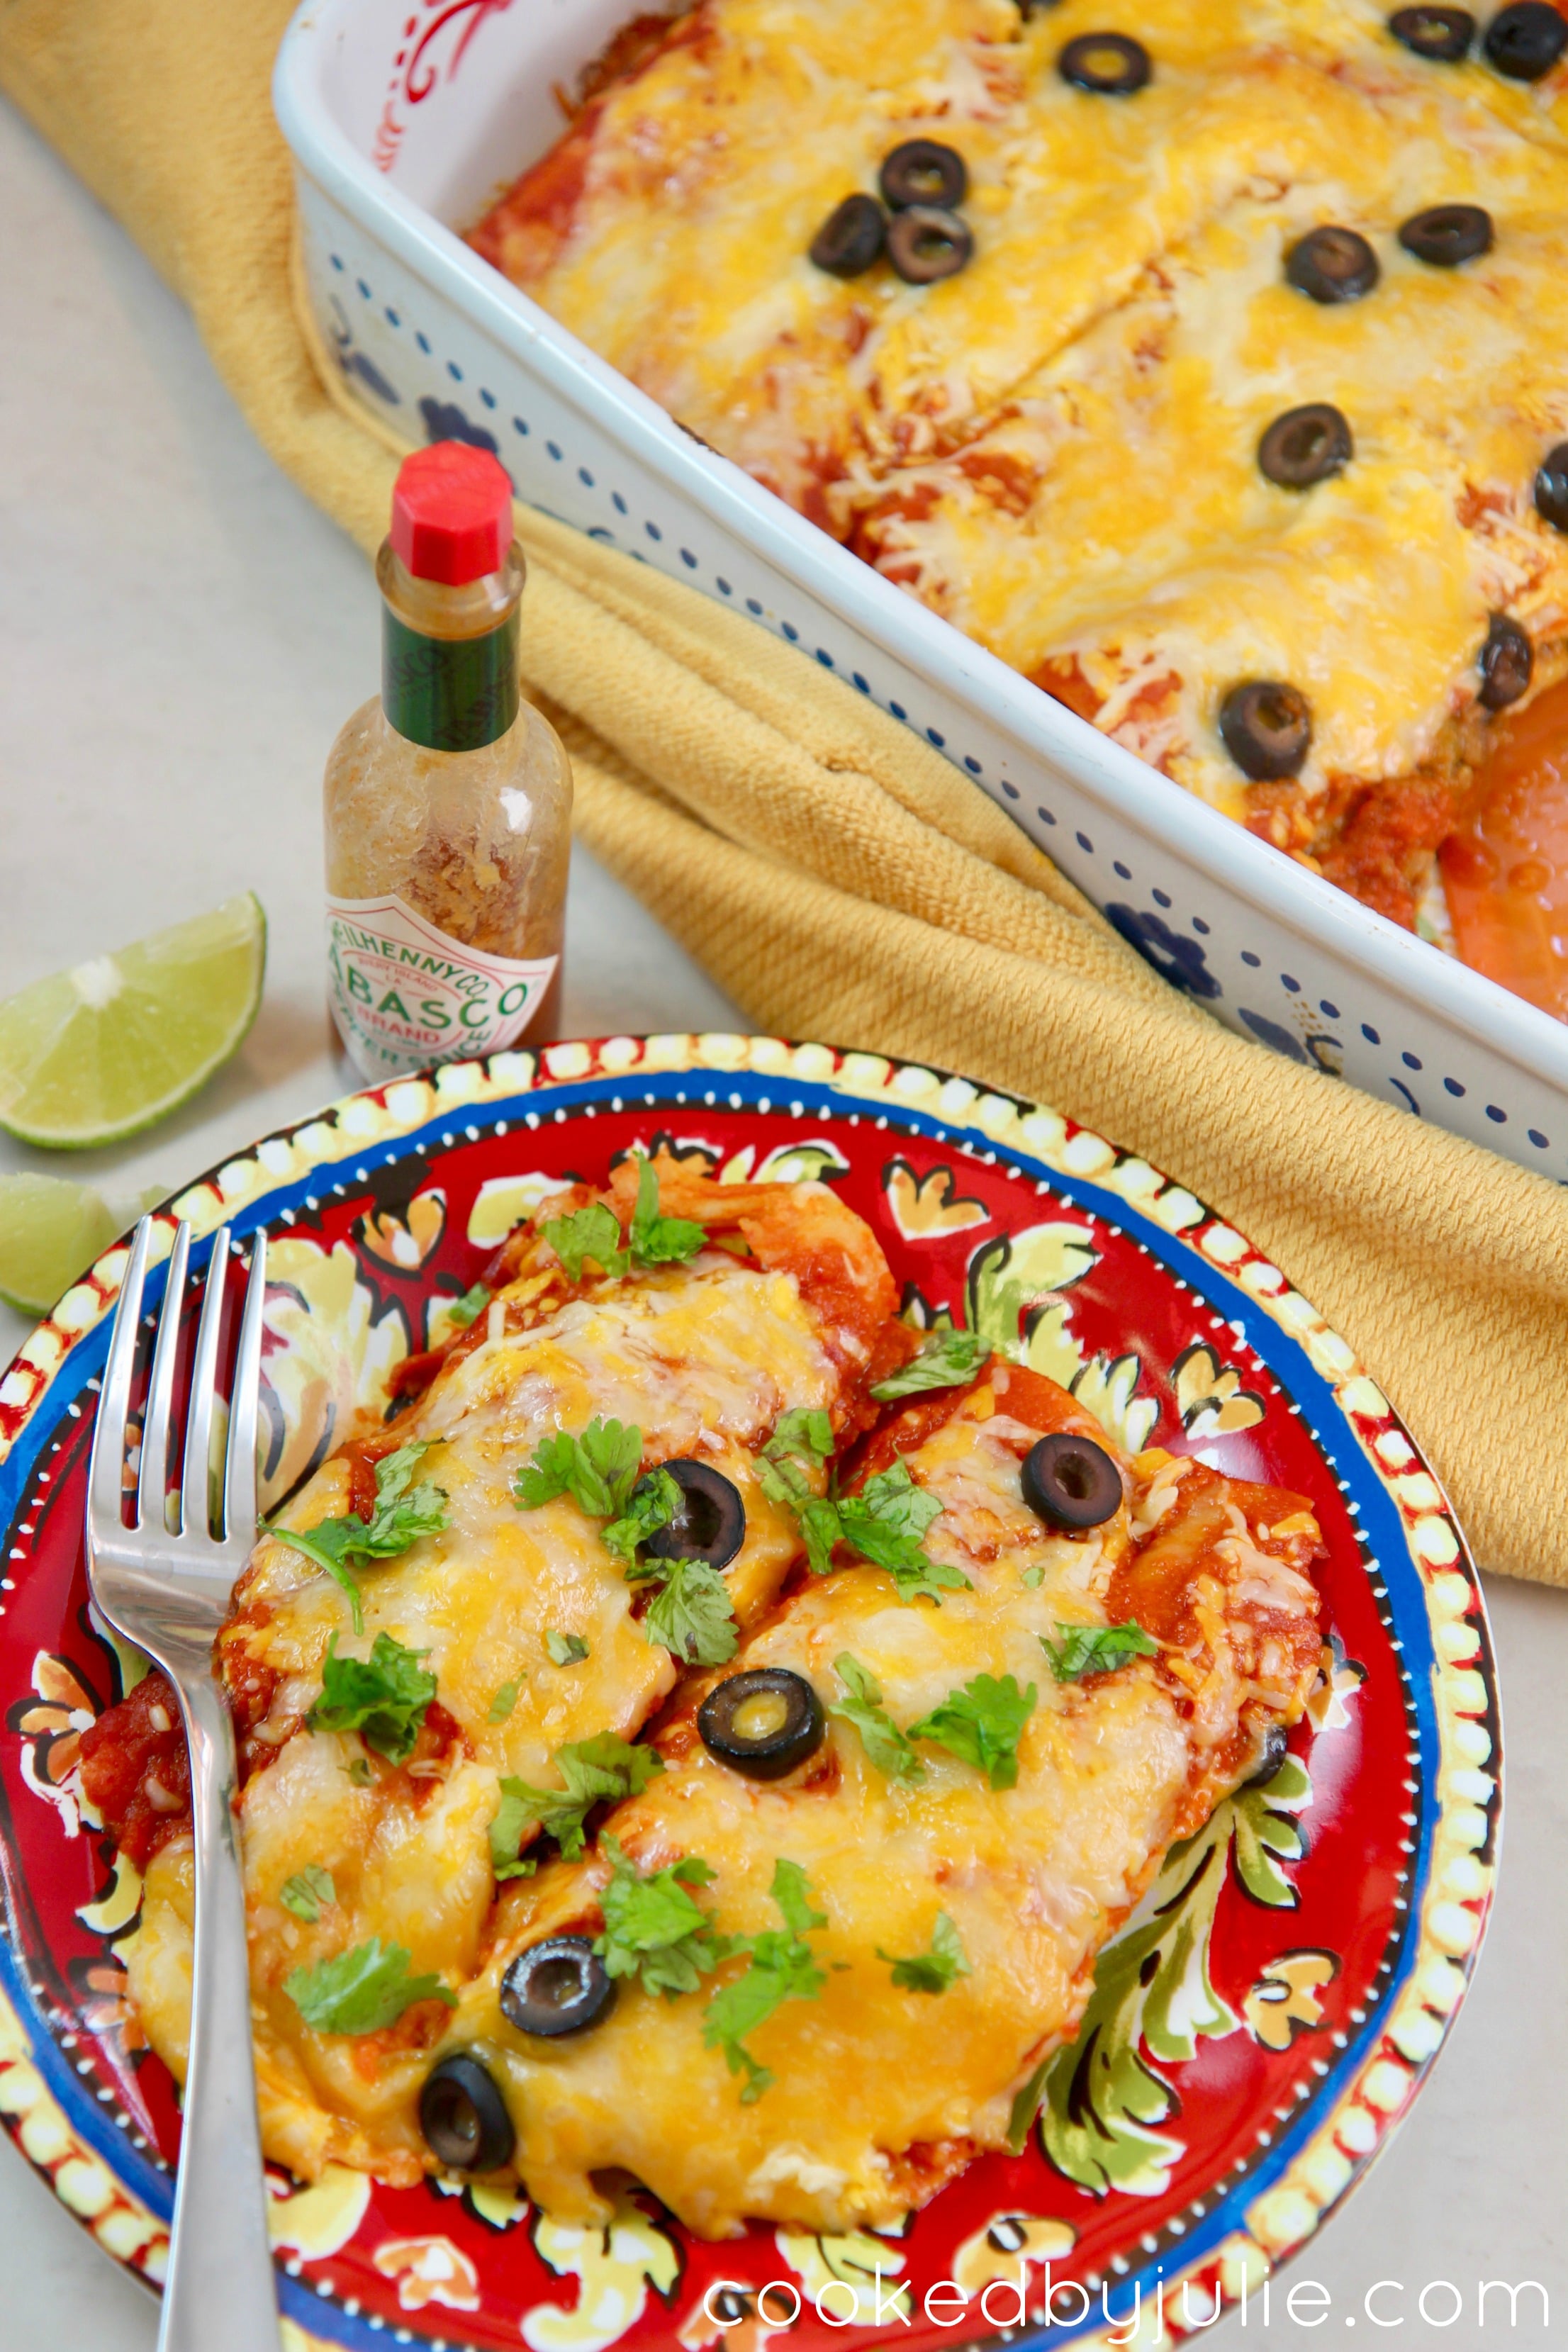 These cheesy beef enchiladas are the perfect party meal. Top with some hot sauce and lime